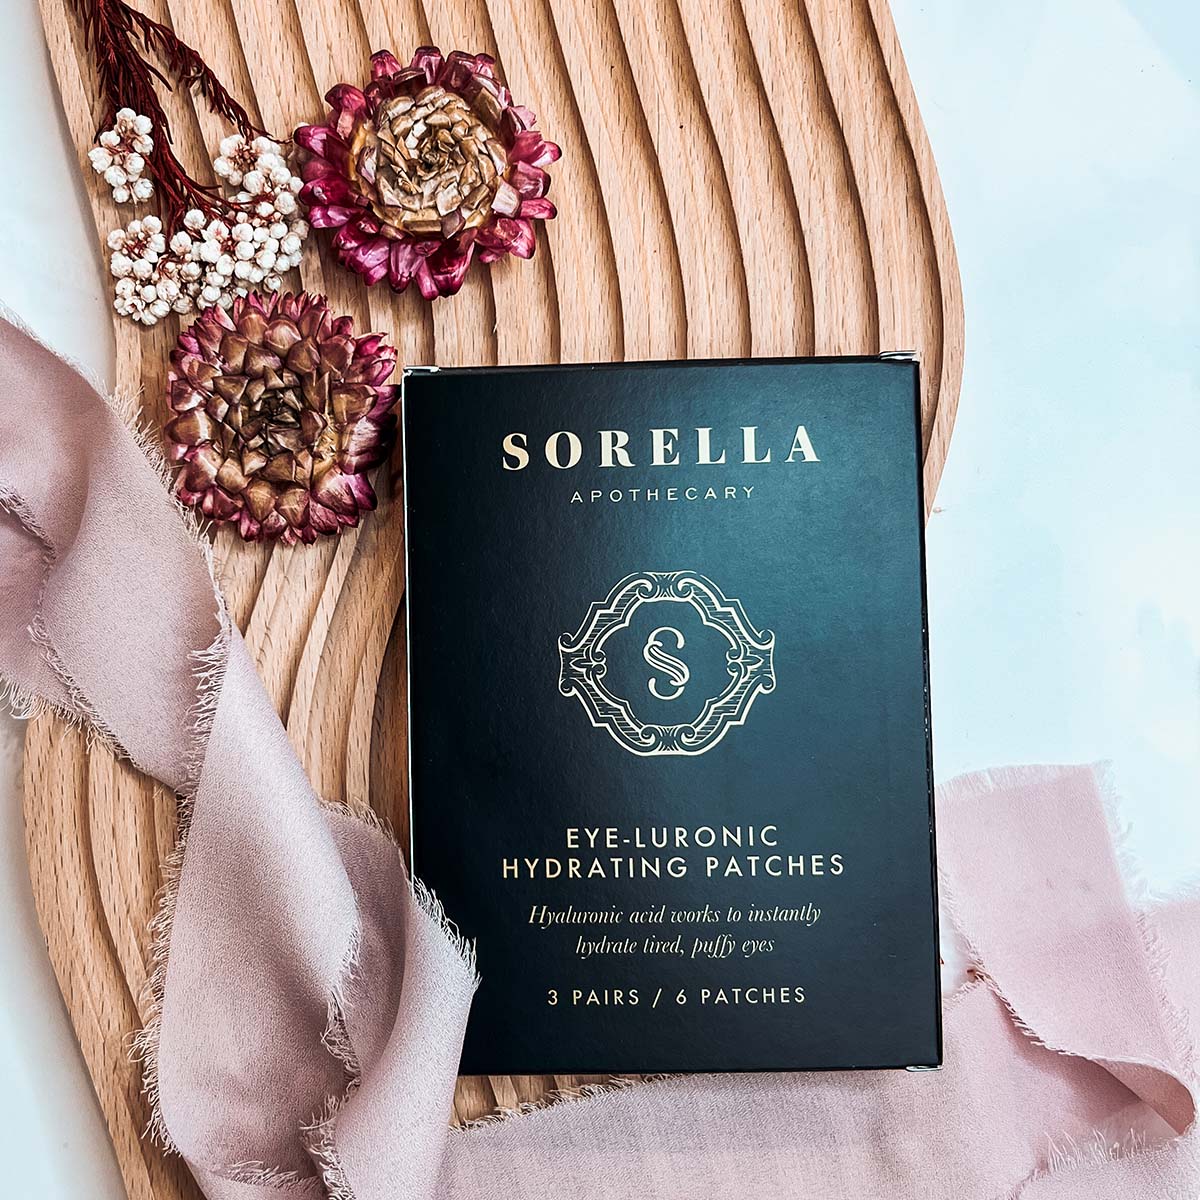 Sorella Apothecary Eye- Luronic Hydrating Patches are a  perfect way to plump the eye area leaving it looking revived and vibrant